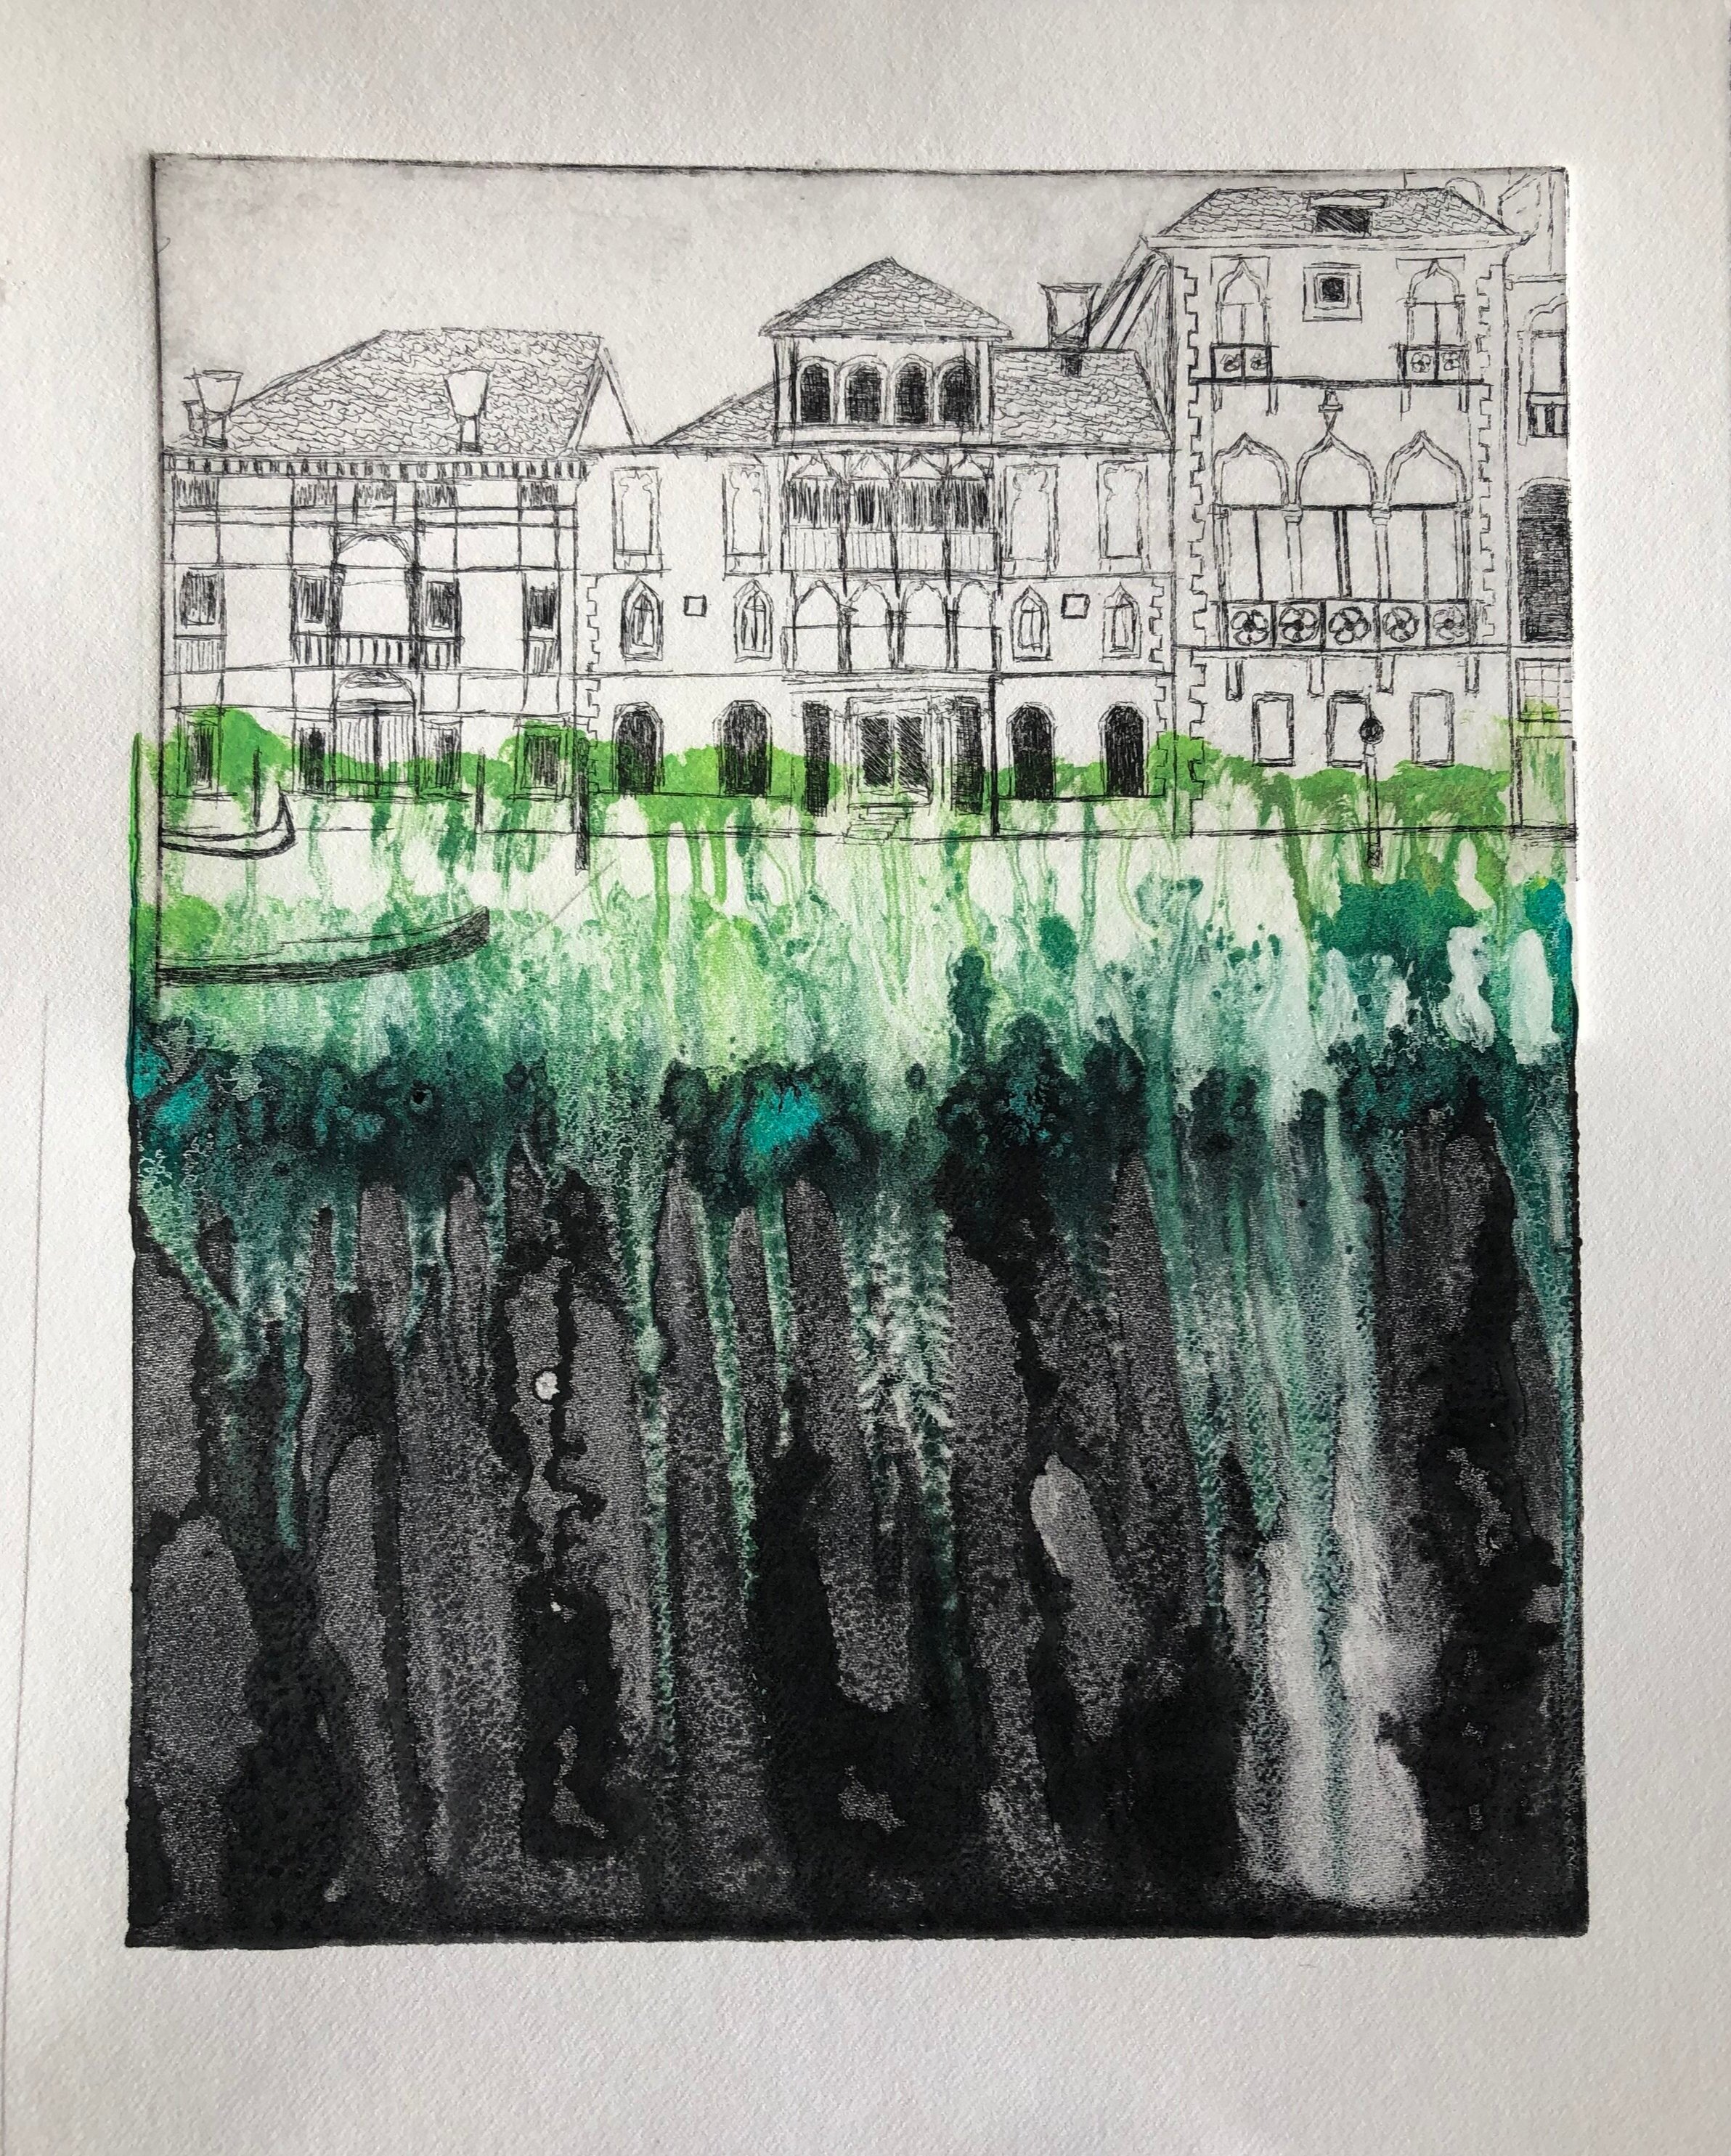  Donna Nadeem (PiV 2019),  Venetian Water #2 , 2019. Etching on copper plate with monoprint, 8 x 12 in. 